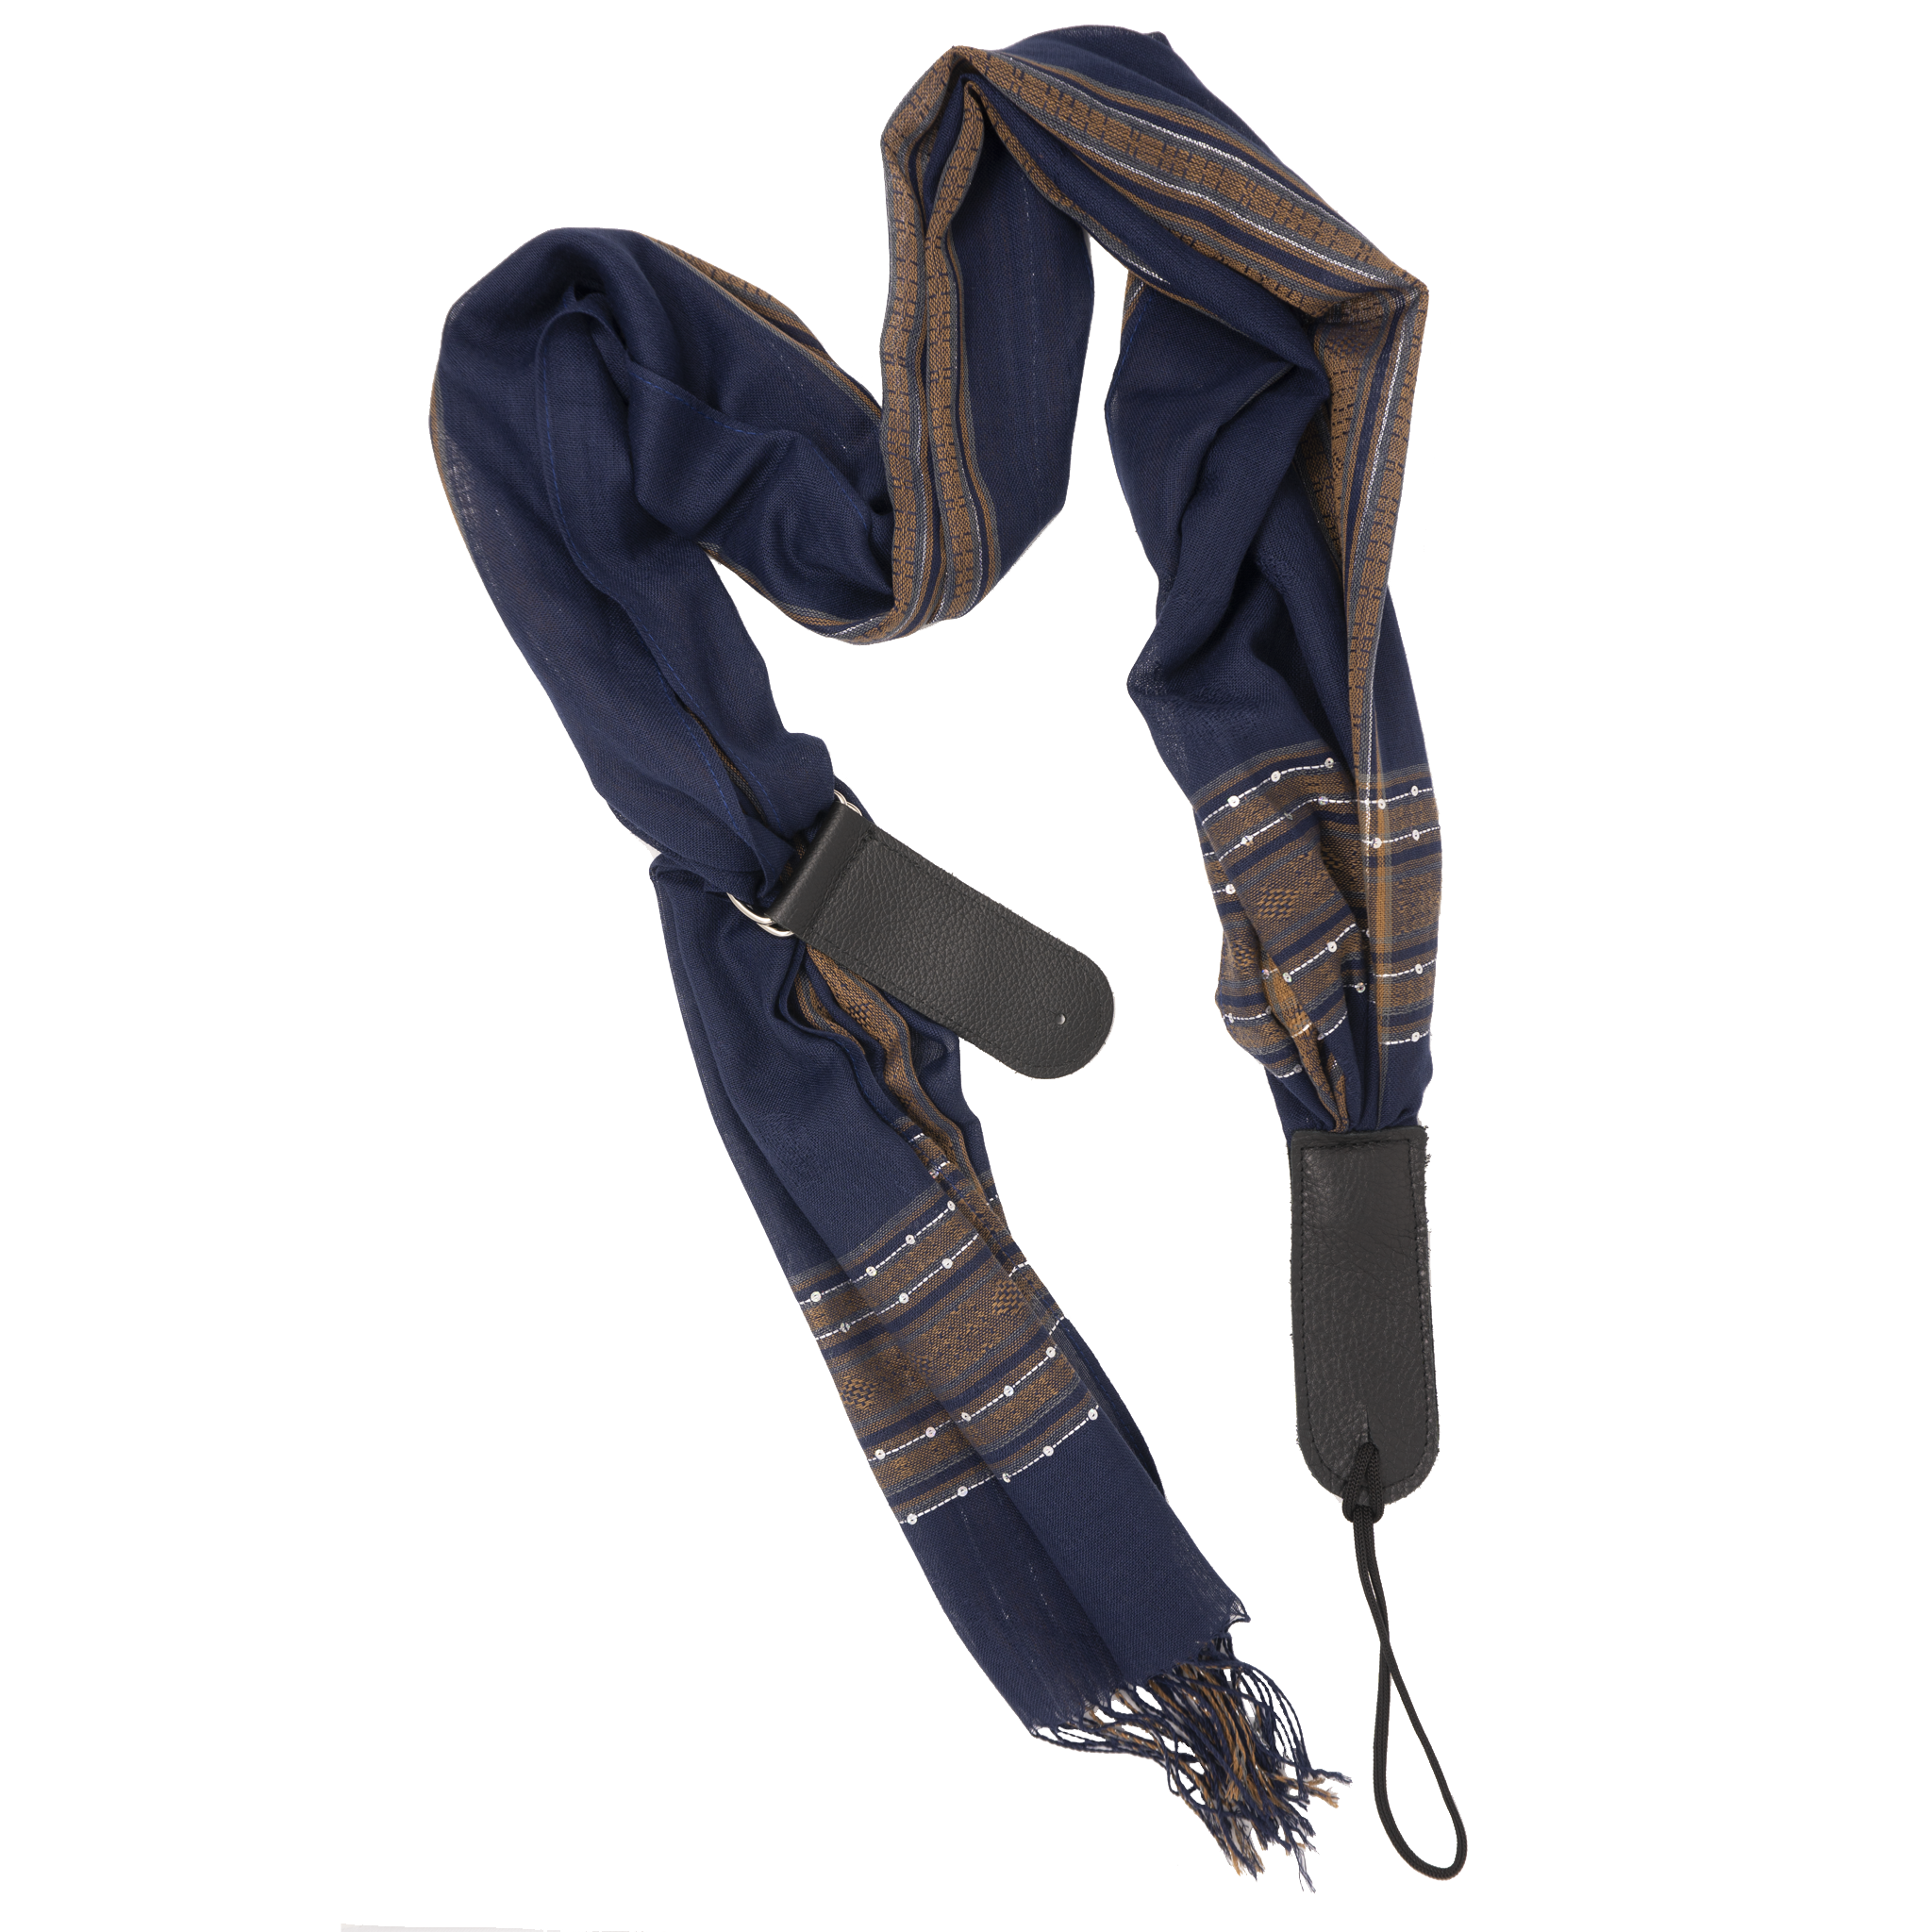 My Fave Guitar Scarf Strap in Navy Vintage